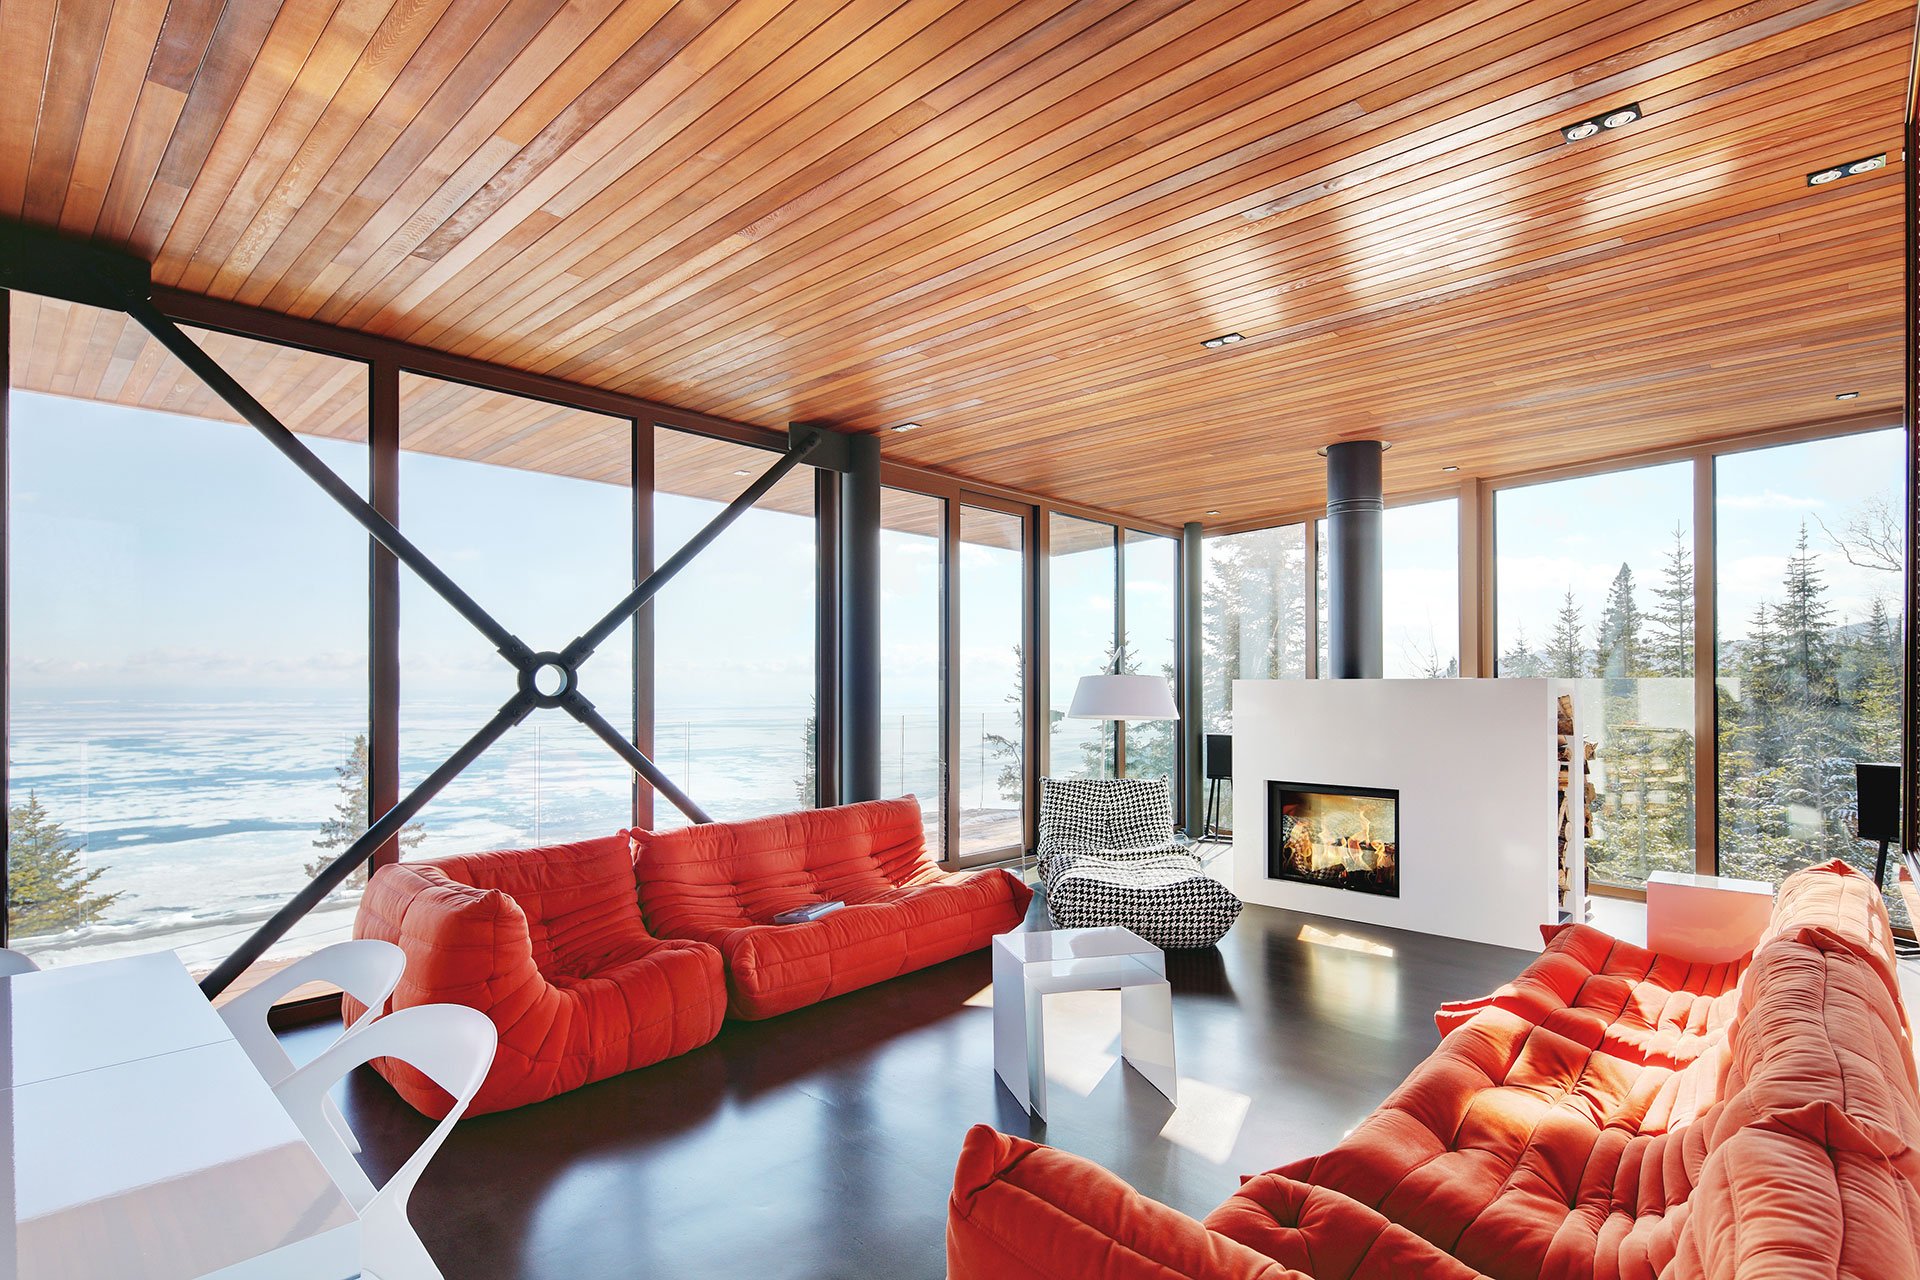 Perched on a promontory overlooking the St. Lawrence River, in Charlevoix, Quebec, this deftly designed home redefines the ski chalet for the 21st century.